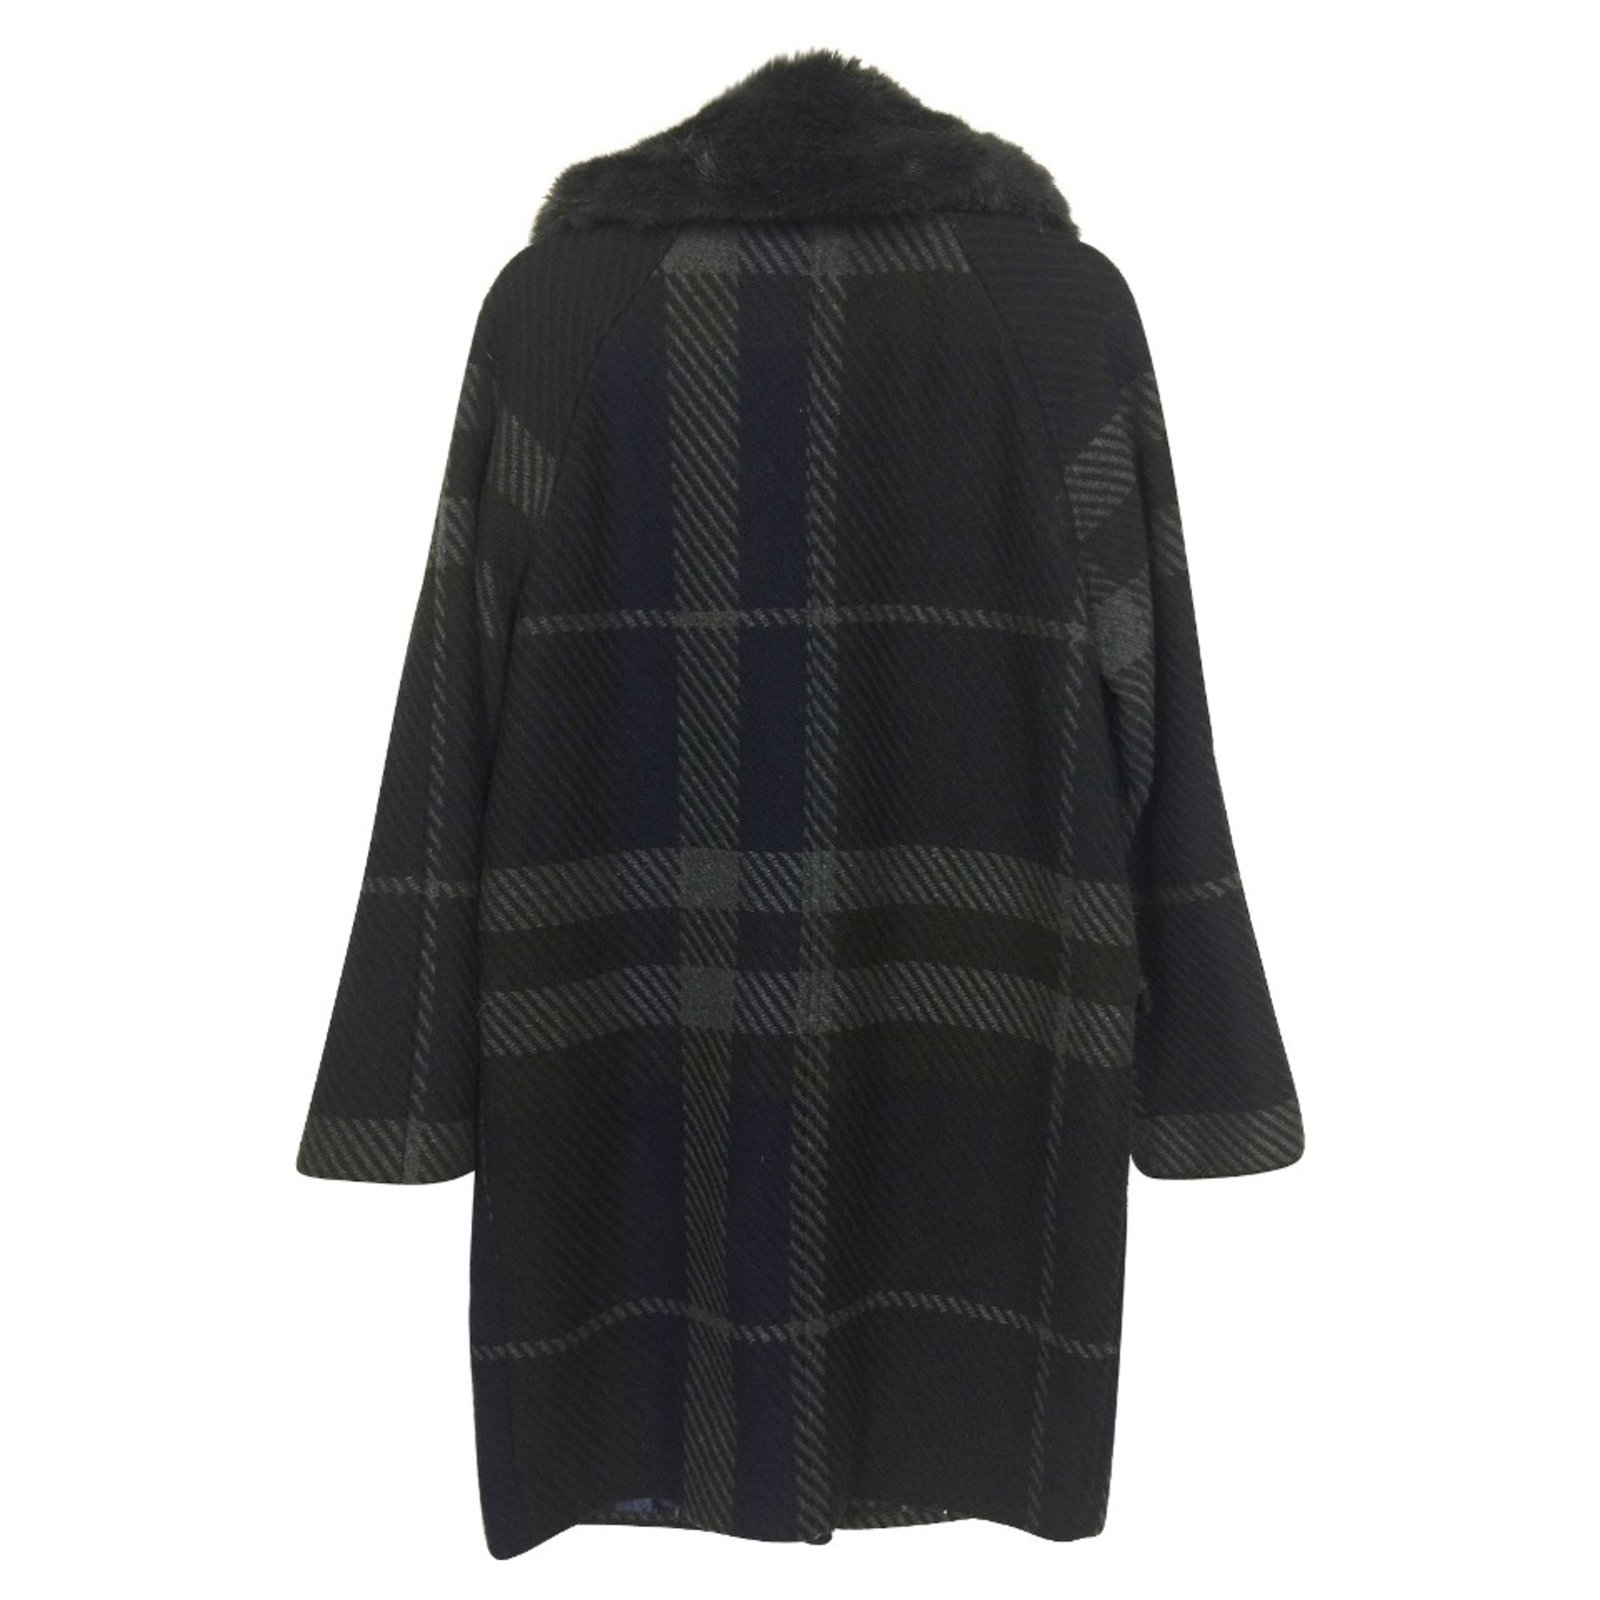 Clements Ribeiro Plaid coat with faux fur collar Black Grey Navy blue ...